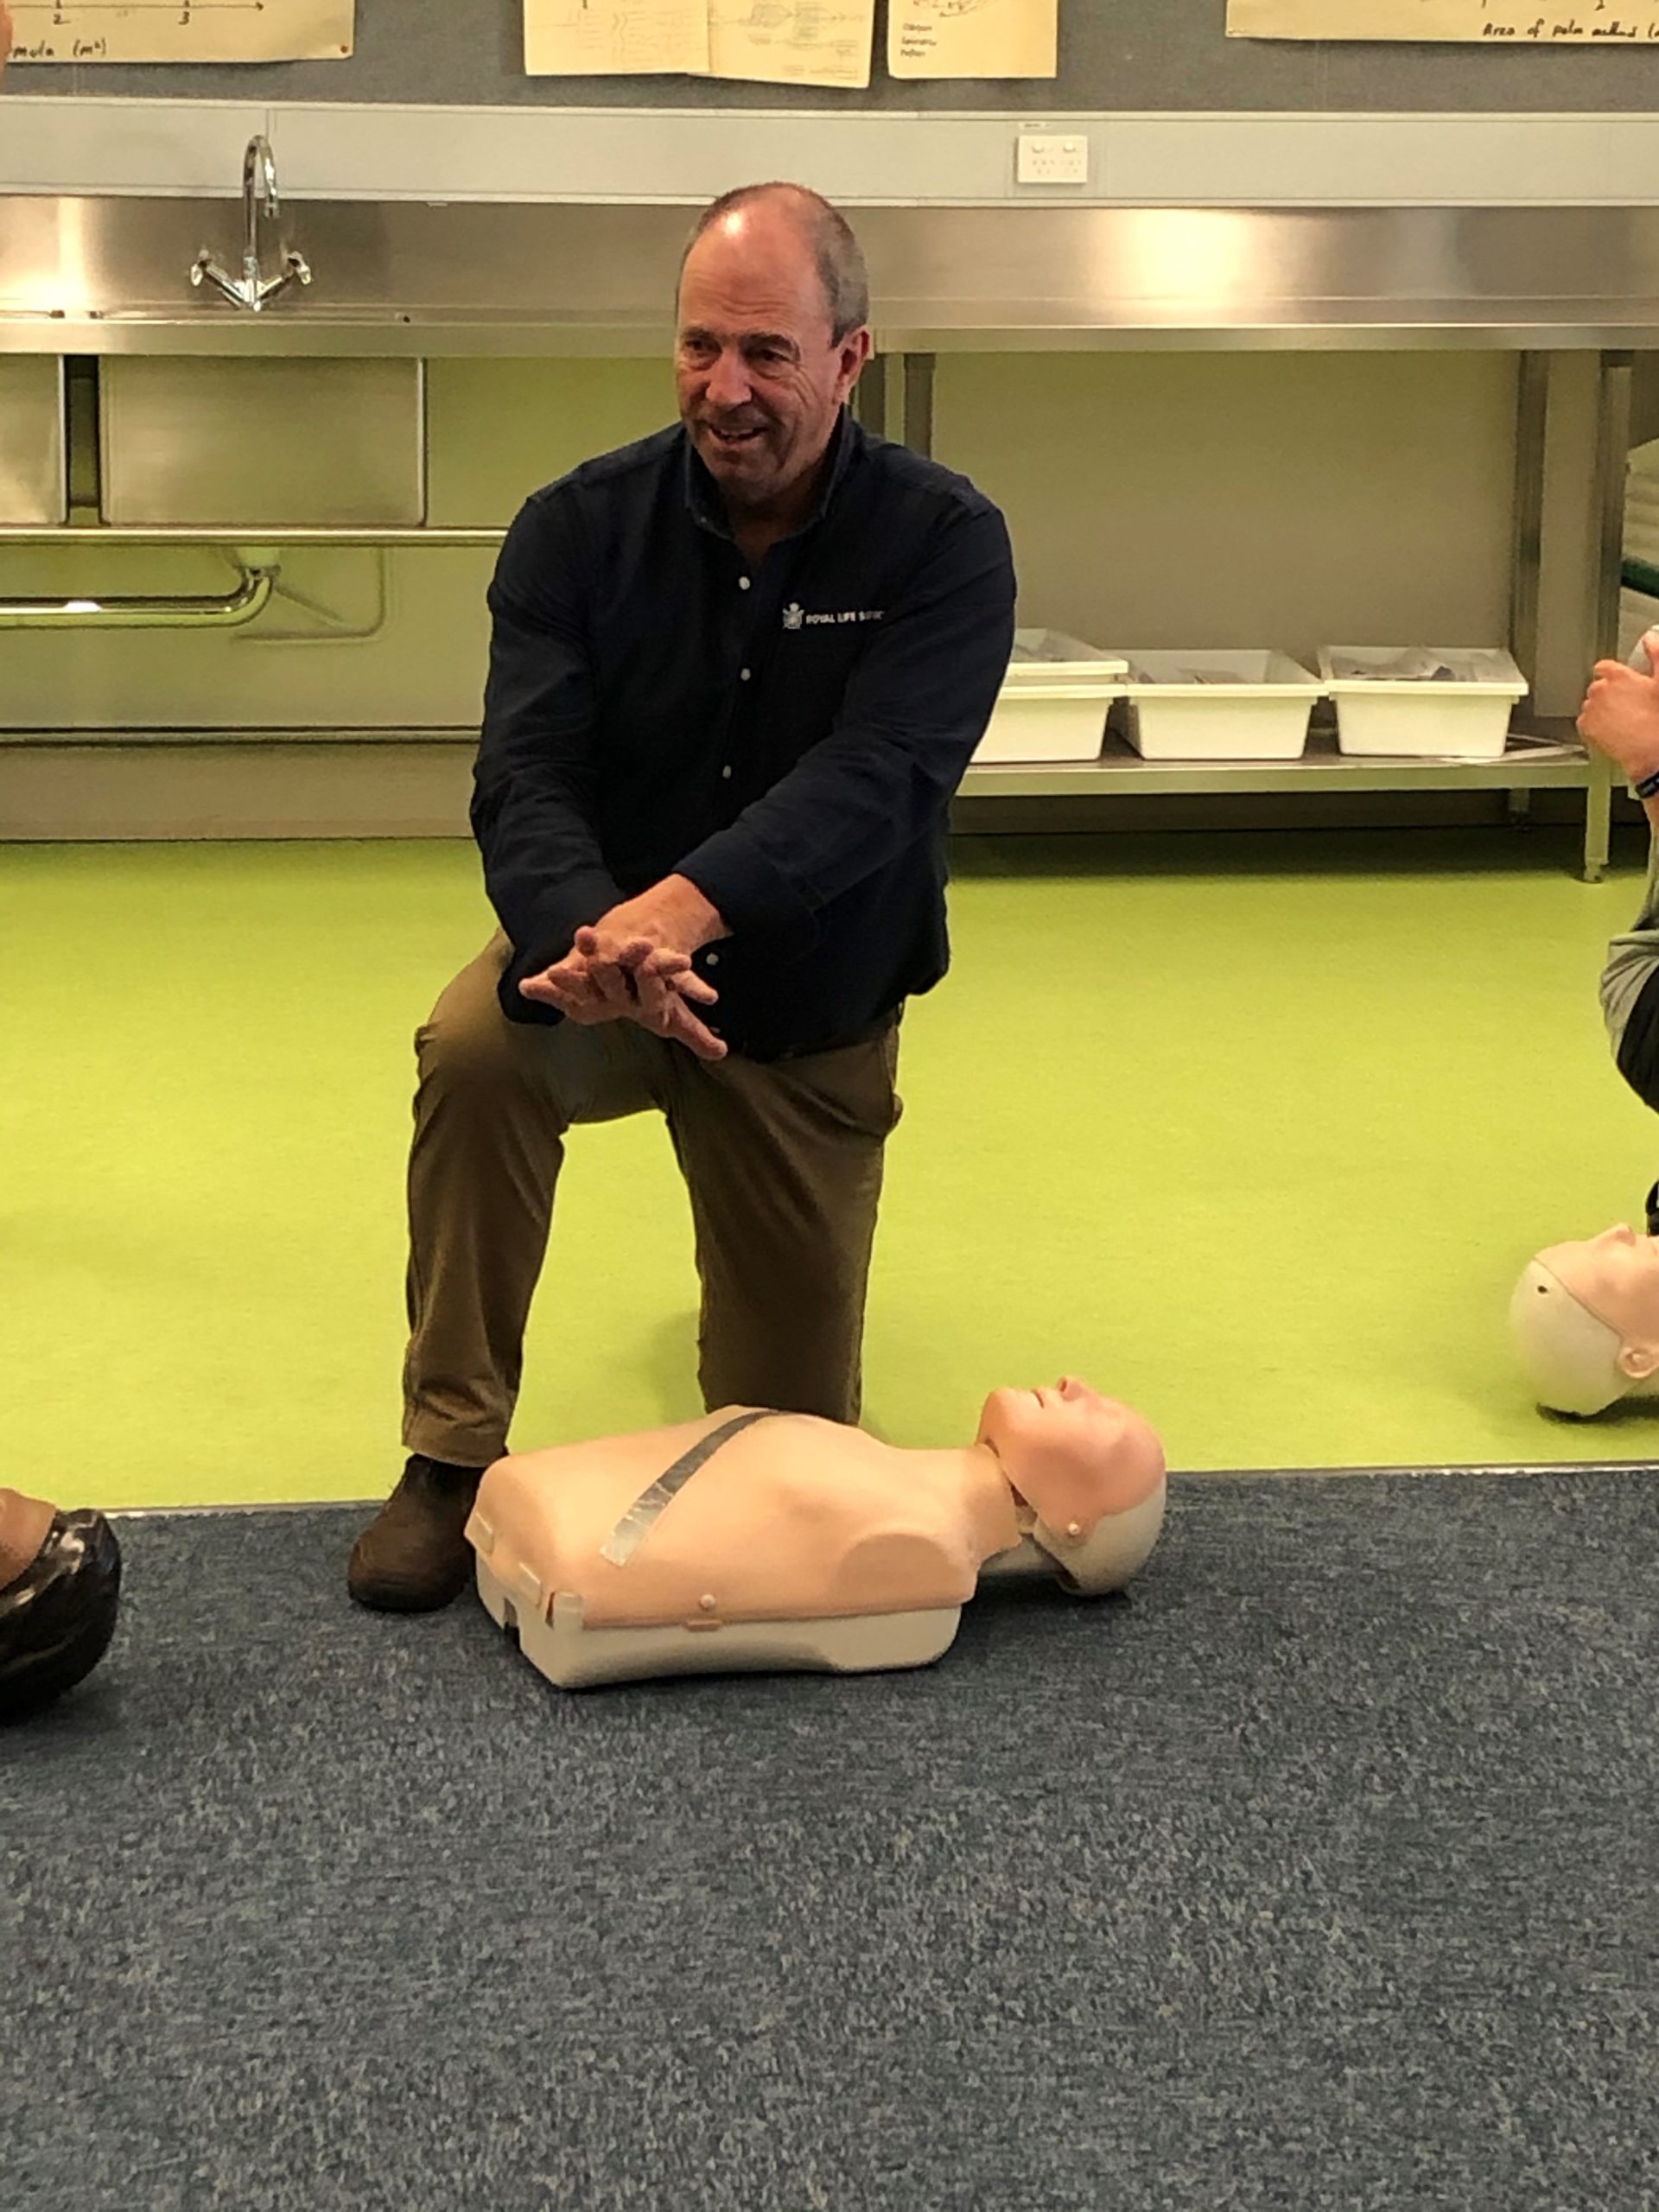 Trainer Stephen - cpr and first aid training northern NSW